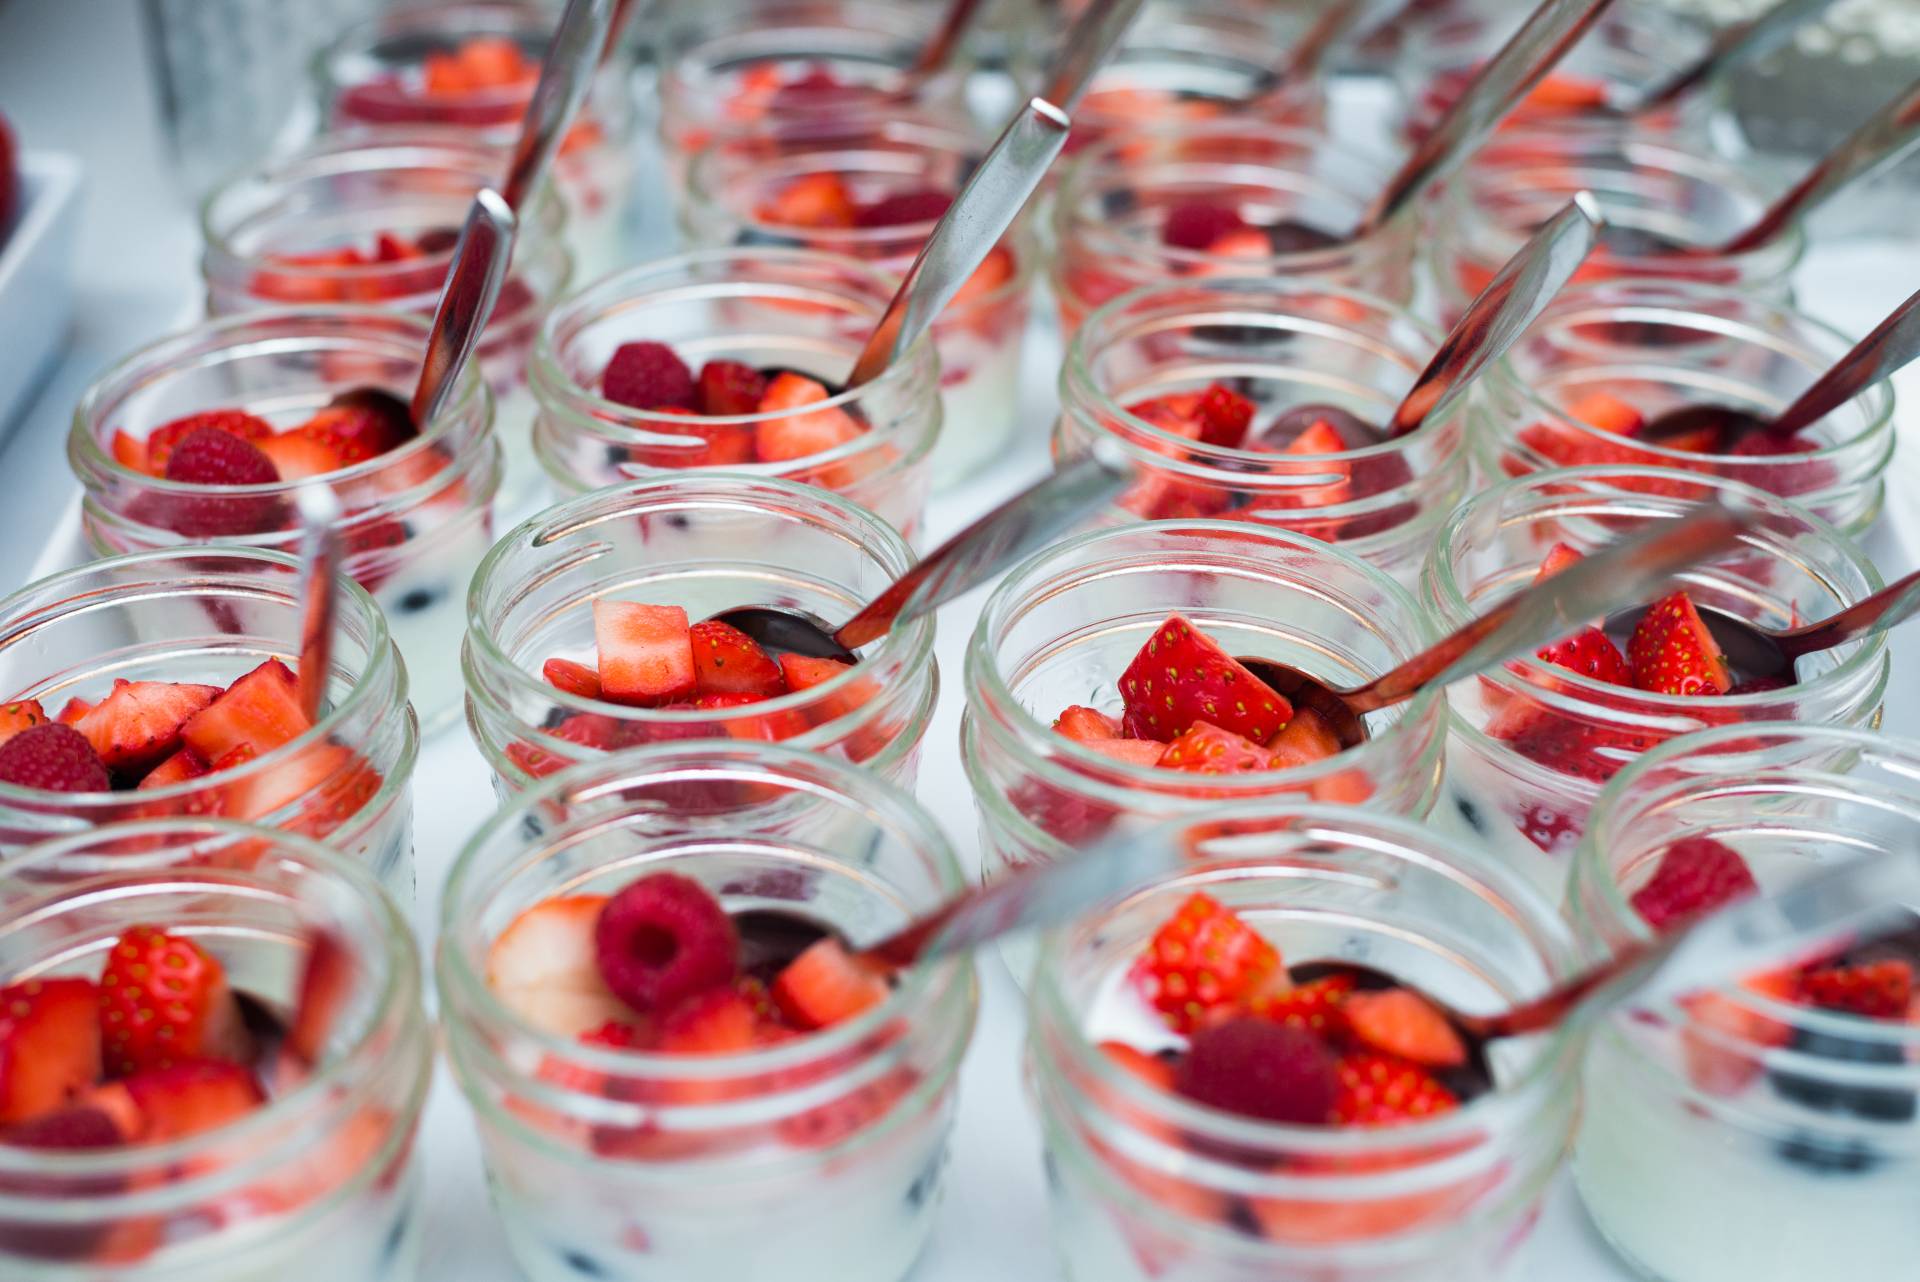 Image of Yogurt Cups served in a small glass jar with raspberries, blueberries and strawberries on top.